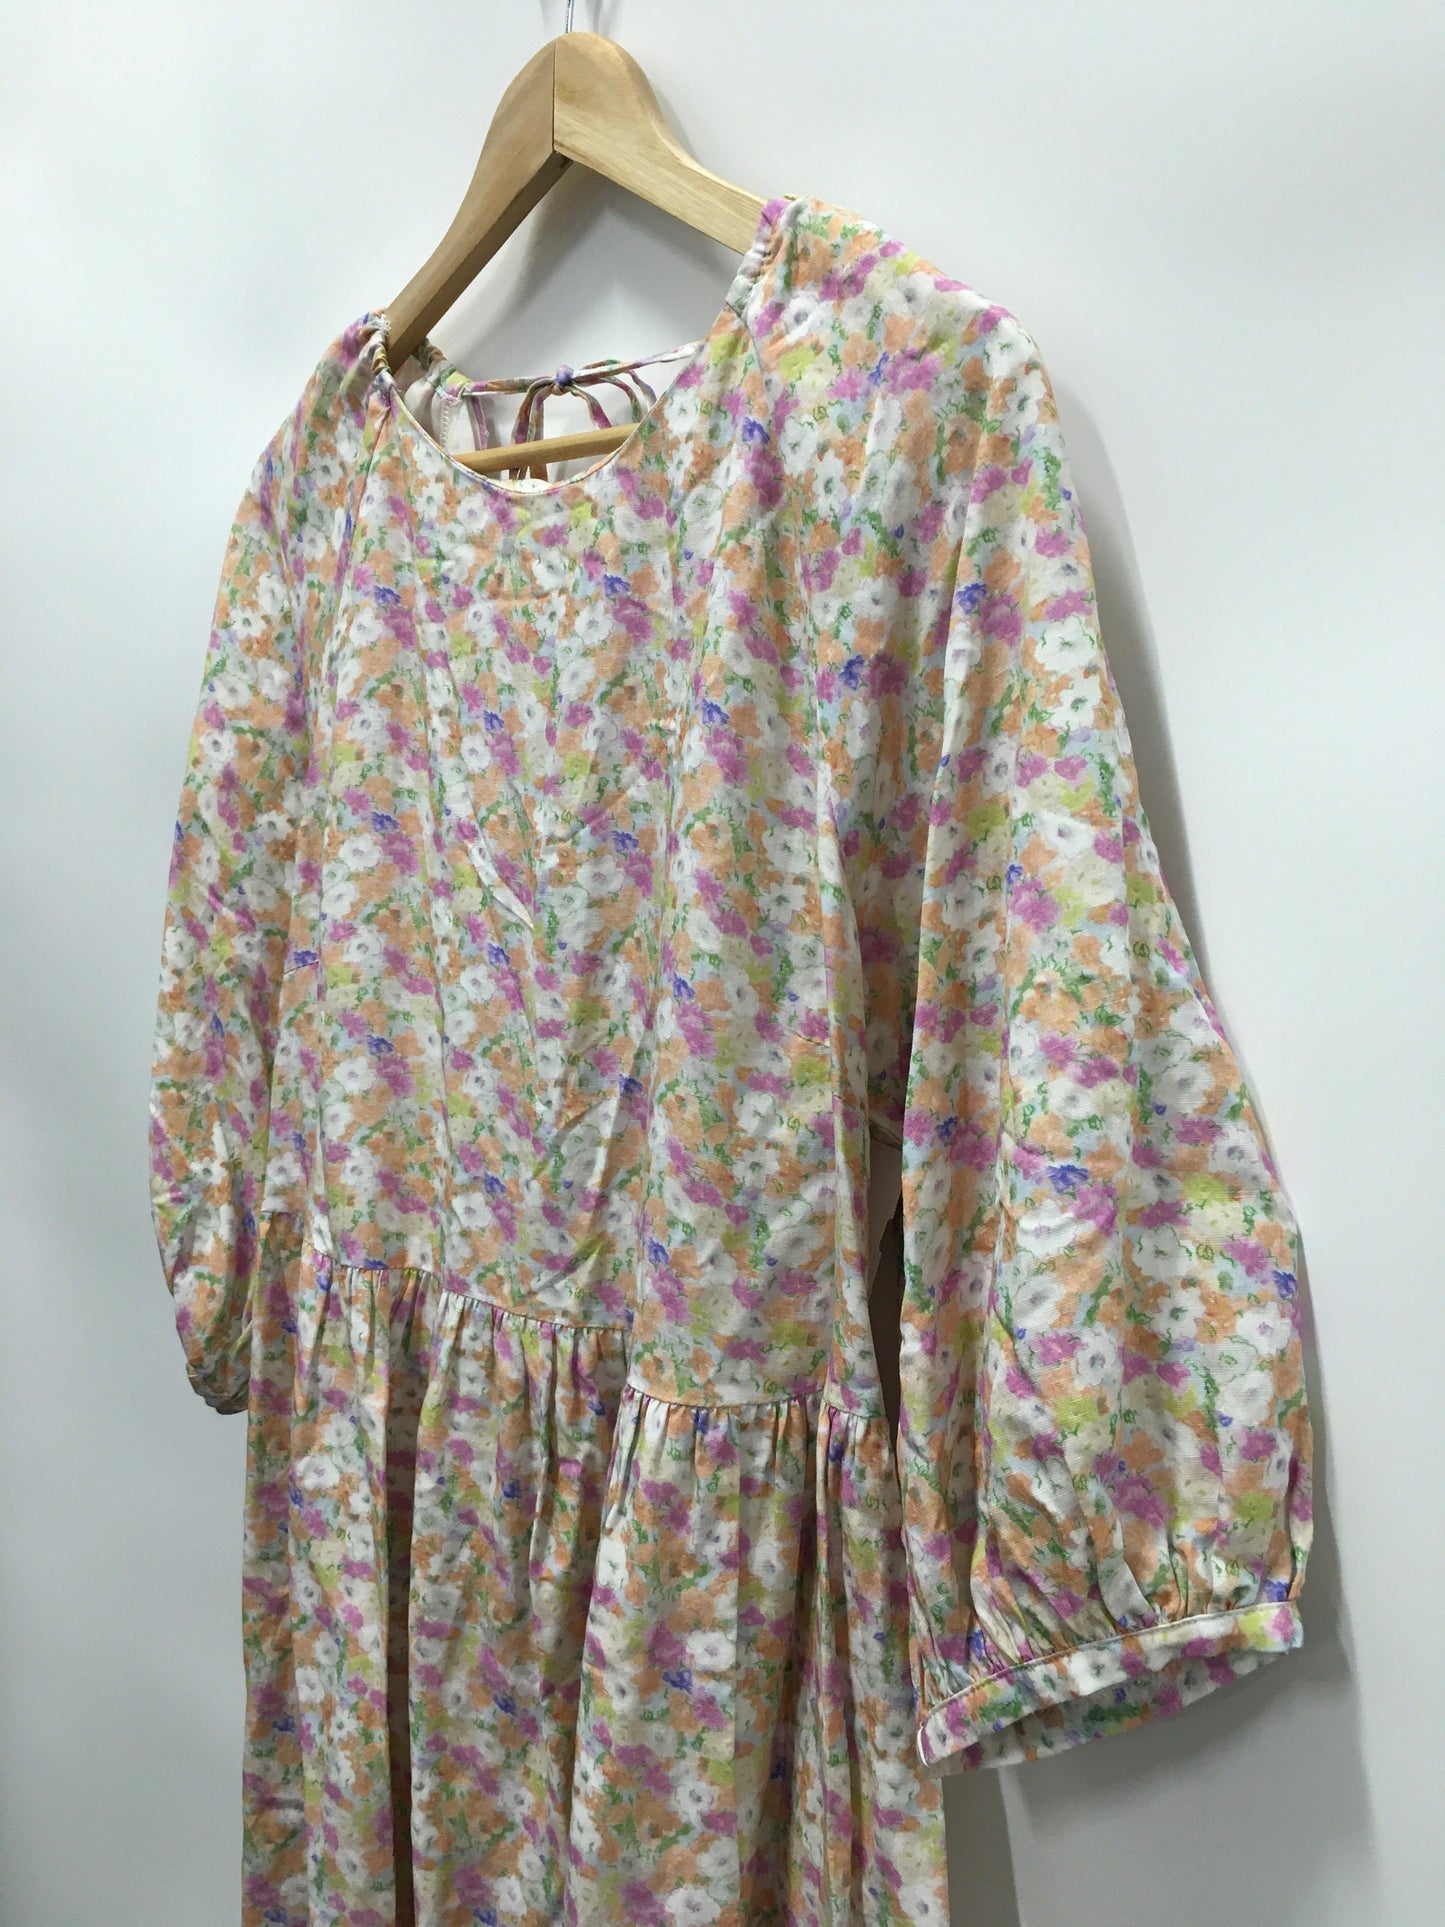 Floral Print Dress Casual Short Frnch, Size L